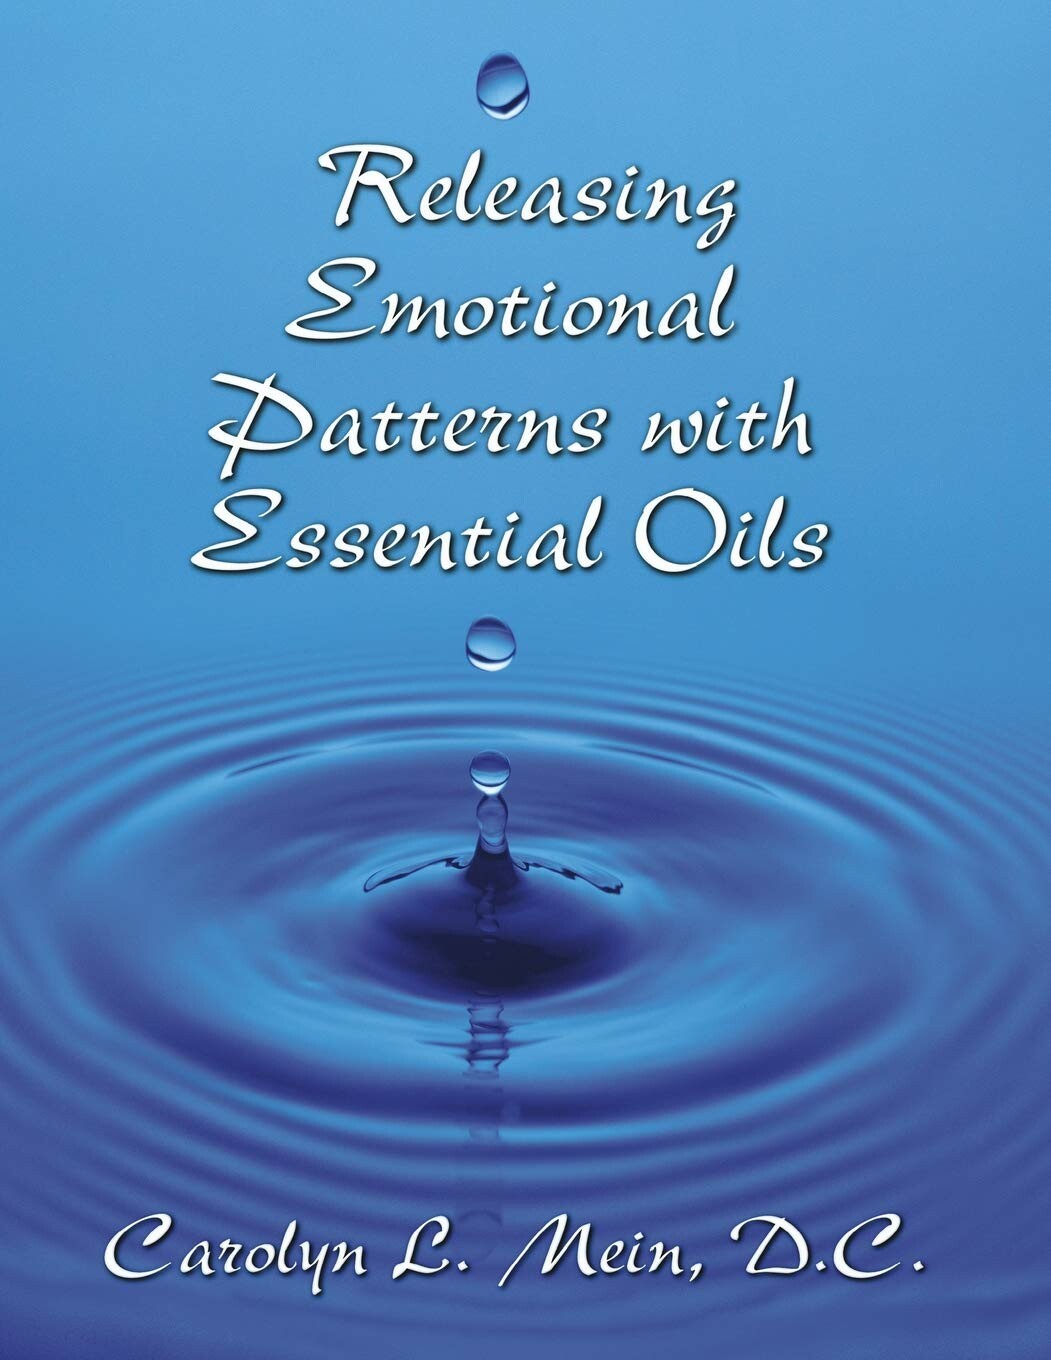 Learn "How to" use the Releasing Emotional Pattern with Essential Oils book